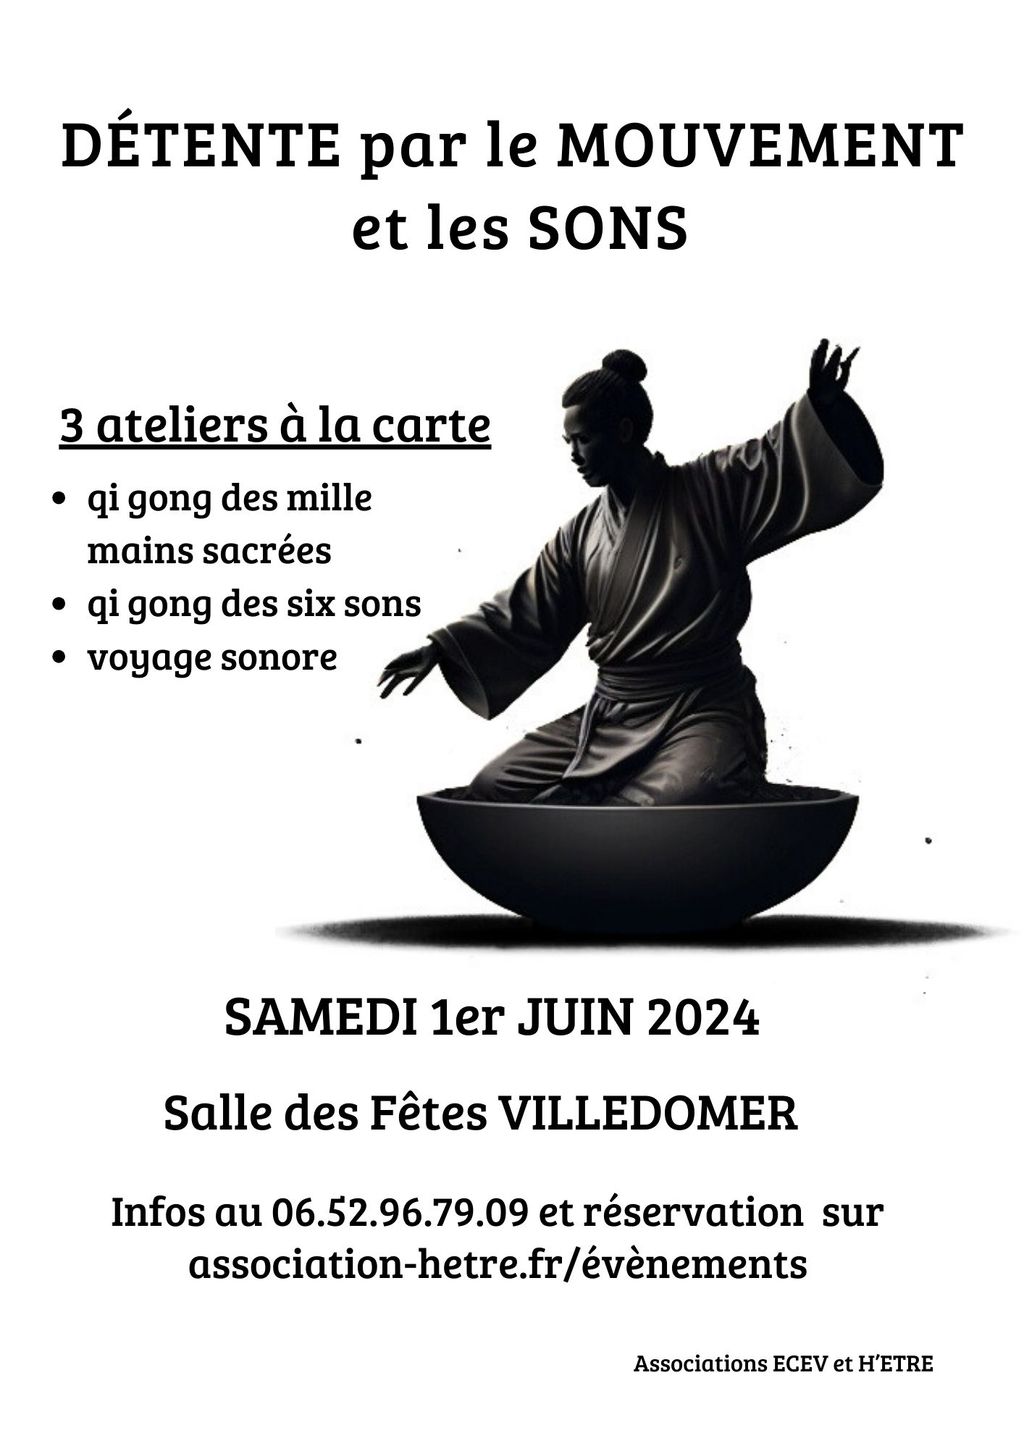 Qi-gong-des-mille-mains-sacrees-qi-gong-des-six-sons-voyage-sonore